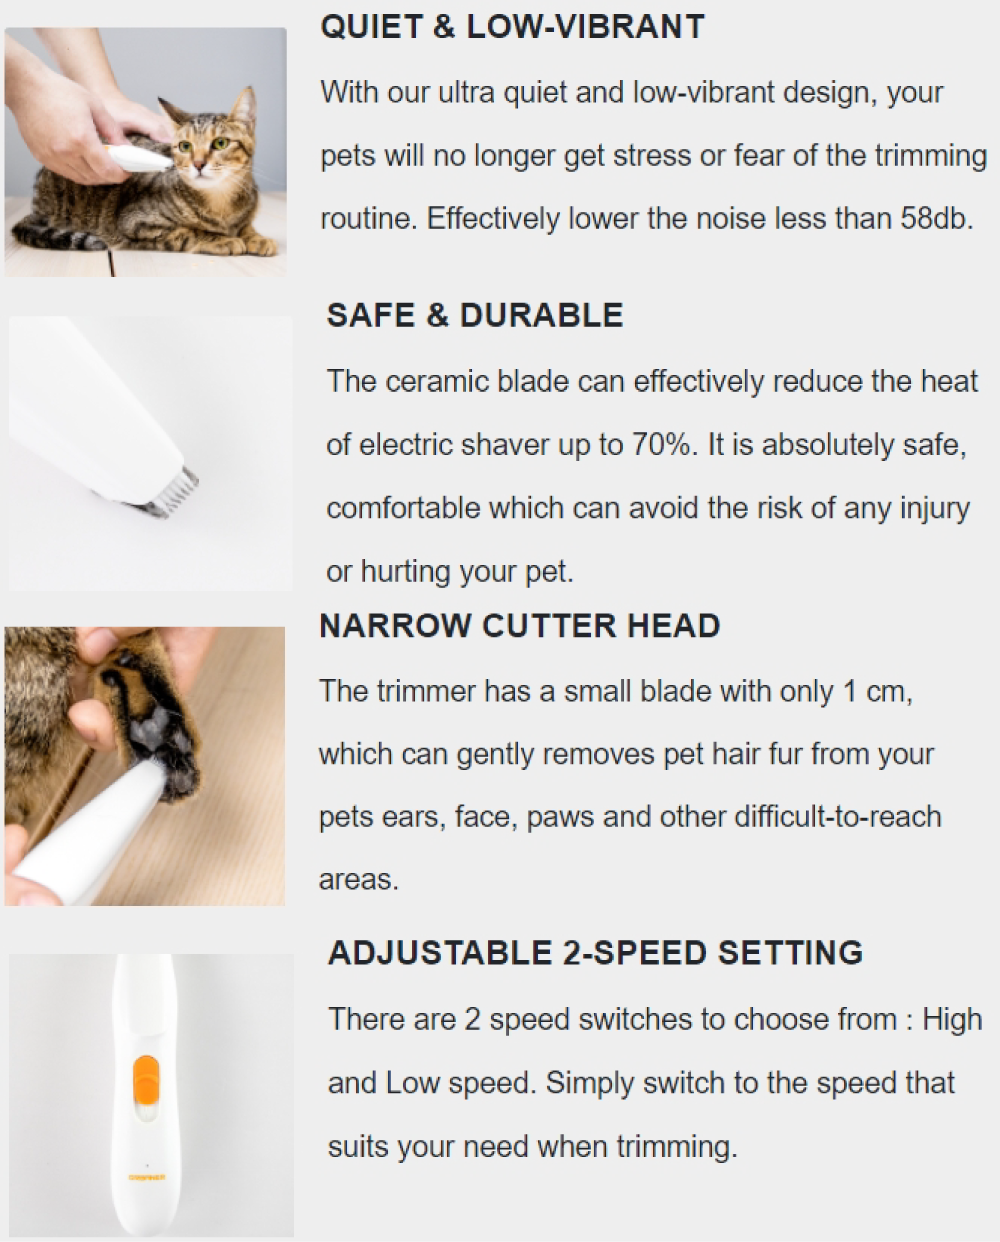     URBANER Pet Electric Trimmer/Clipper for Small Cats, MB-021 URBANER Pet Electric Trimmer/Clipper for Small Cats, MB-021 URBANER Pet Electric Trimmer/Clipper for Small Cats, MB-021 URBANER Pet Electric Trimmer/Clipper for Small Cats, MB-021